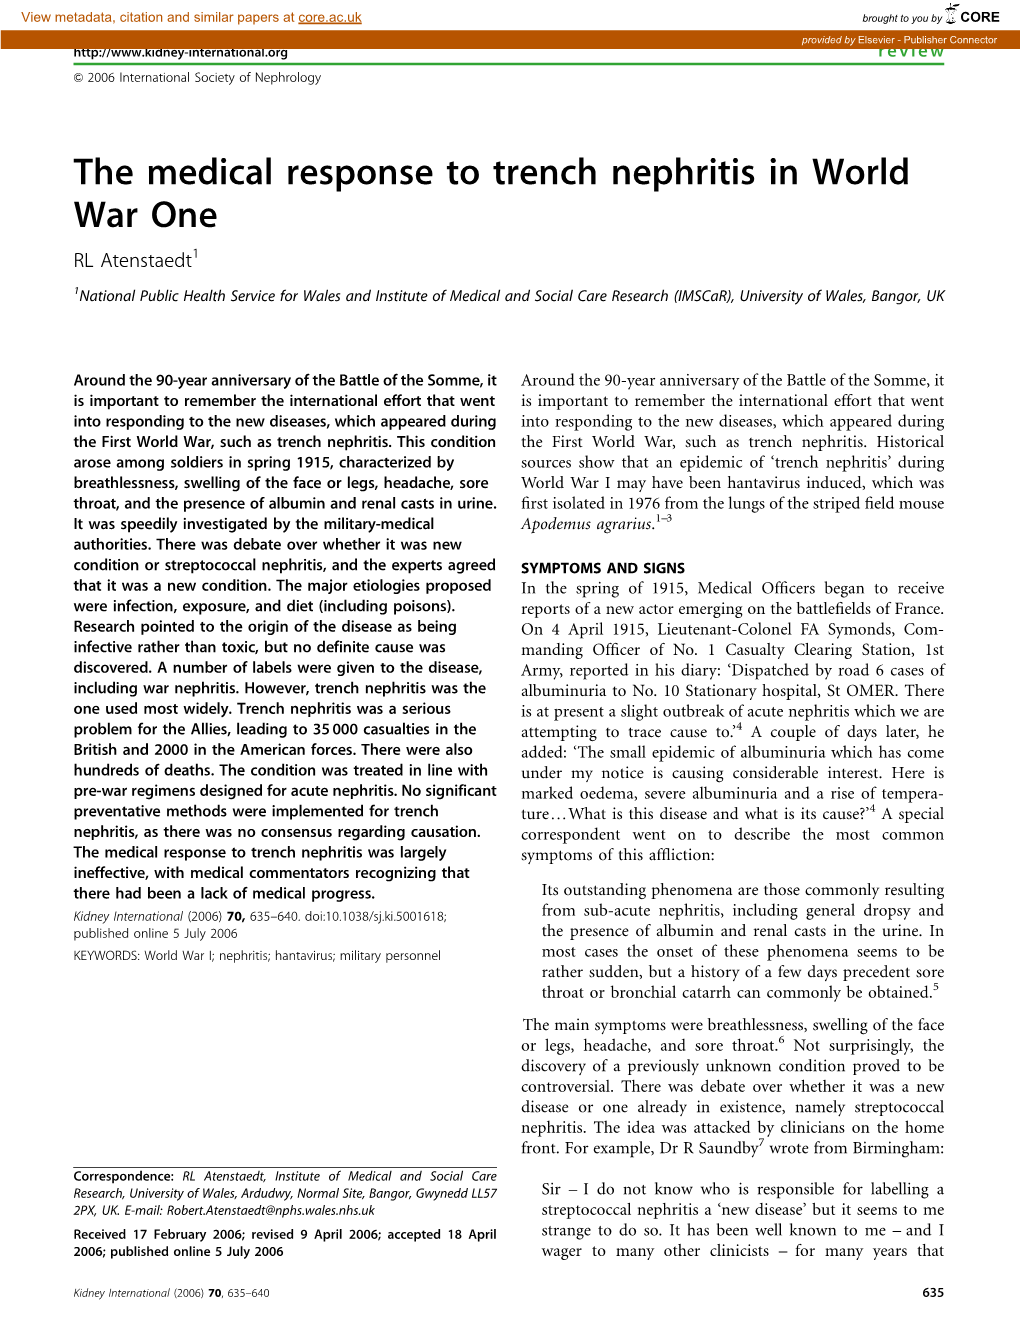 The Medical Response to Trench Nephritis in World War One RL Atenstaedt1